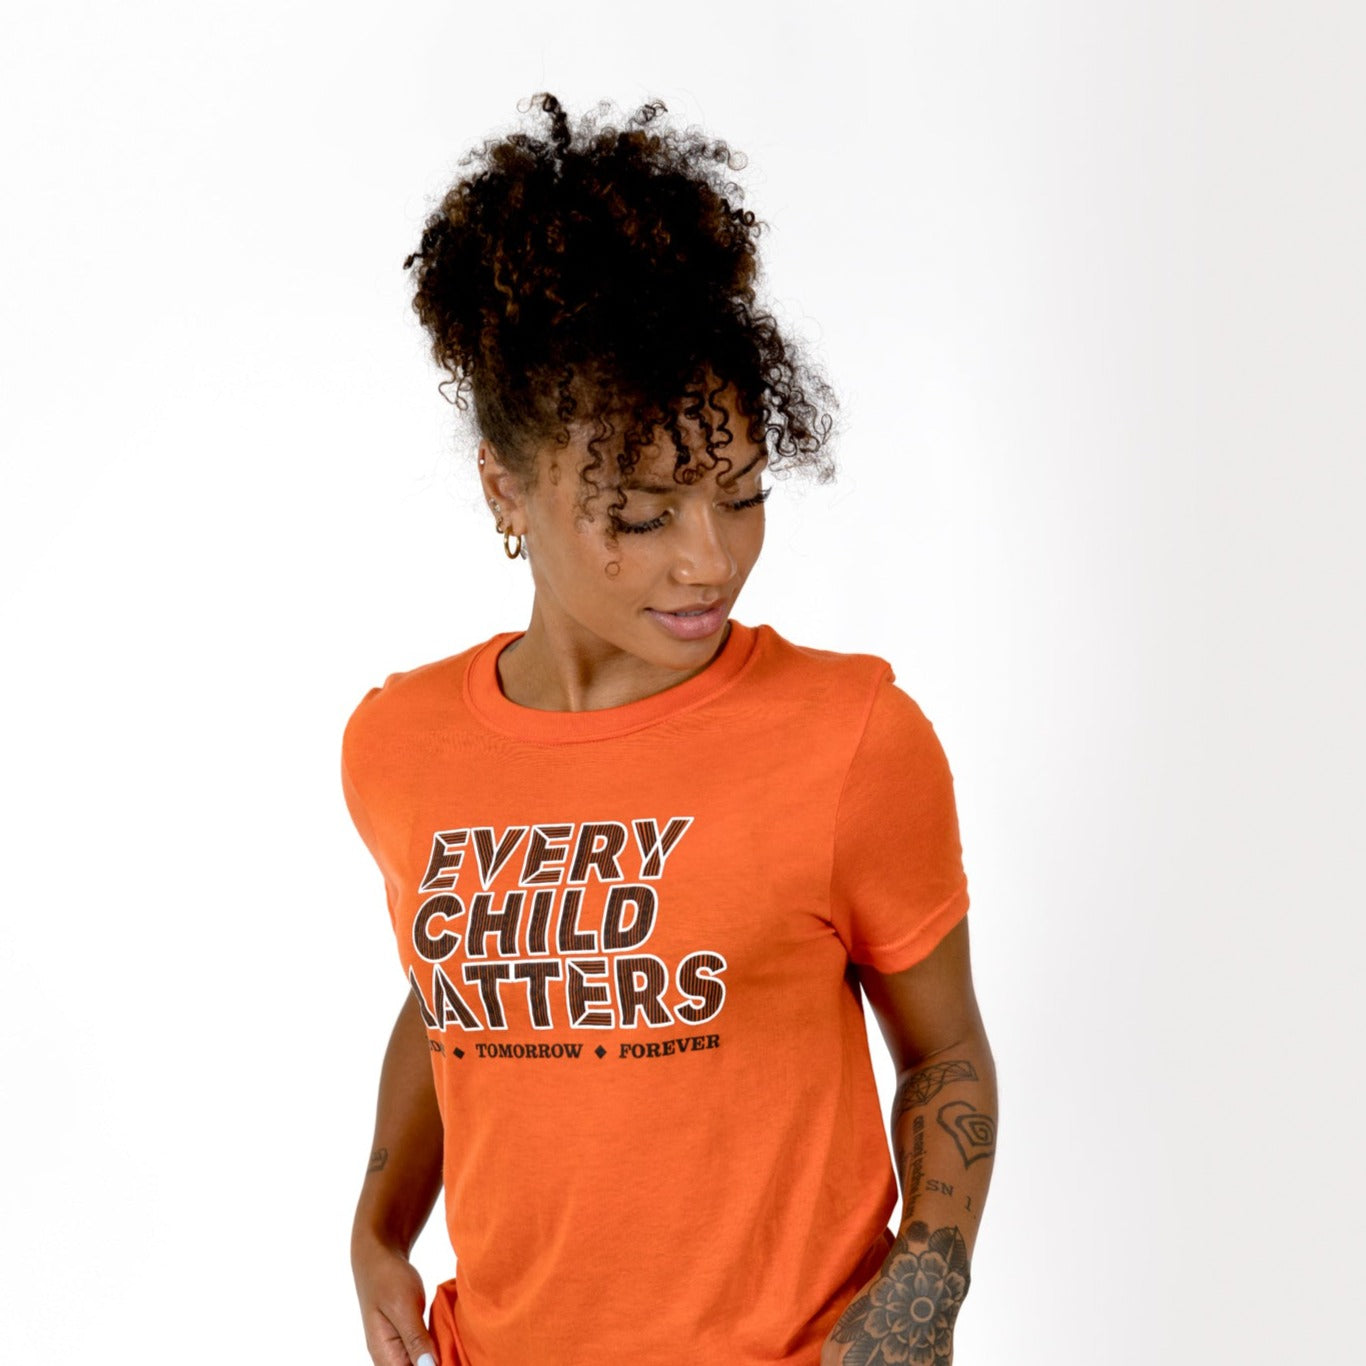 Muin X Stanfield's Adult Orange T-Shirt - EVERY CHILD MATTERS  "QUILL"